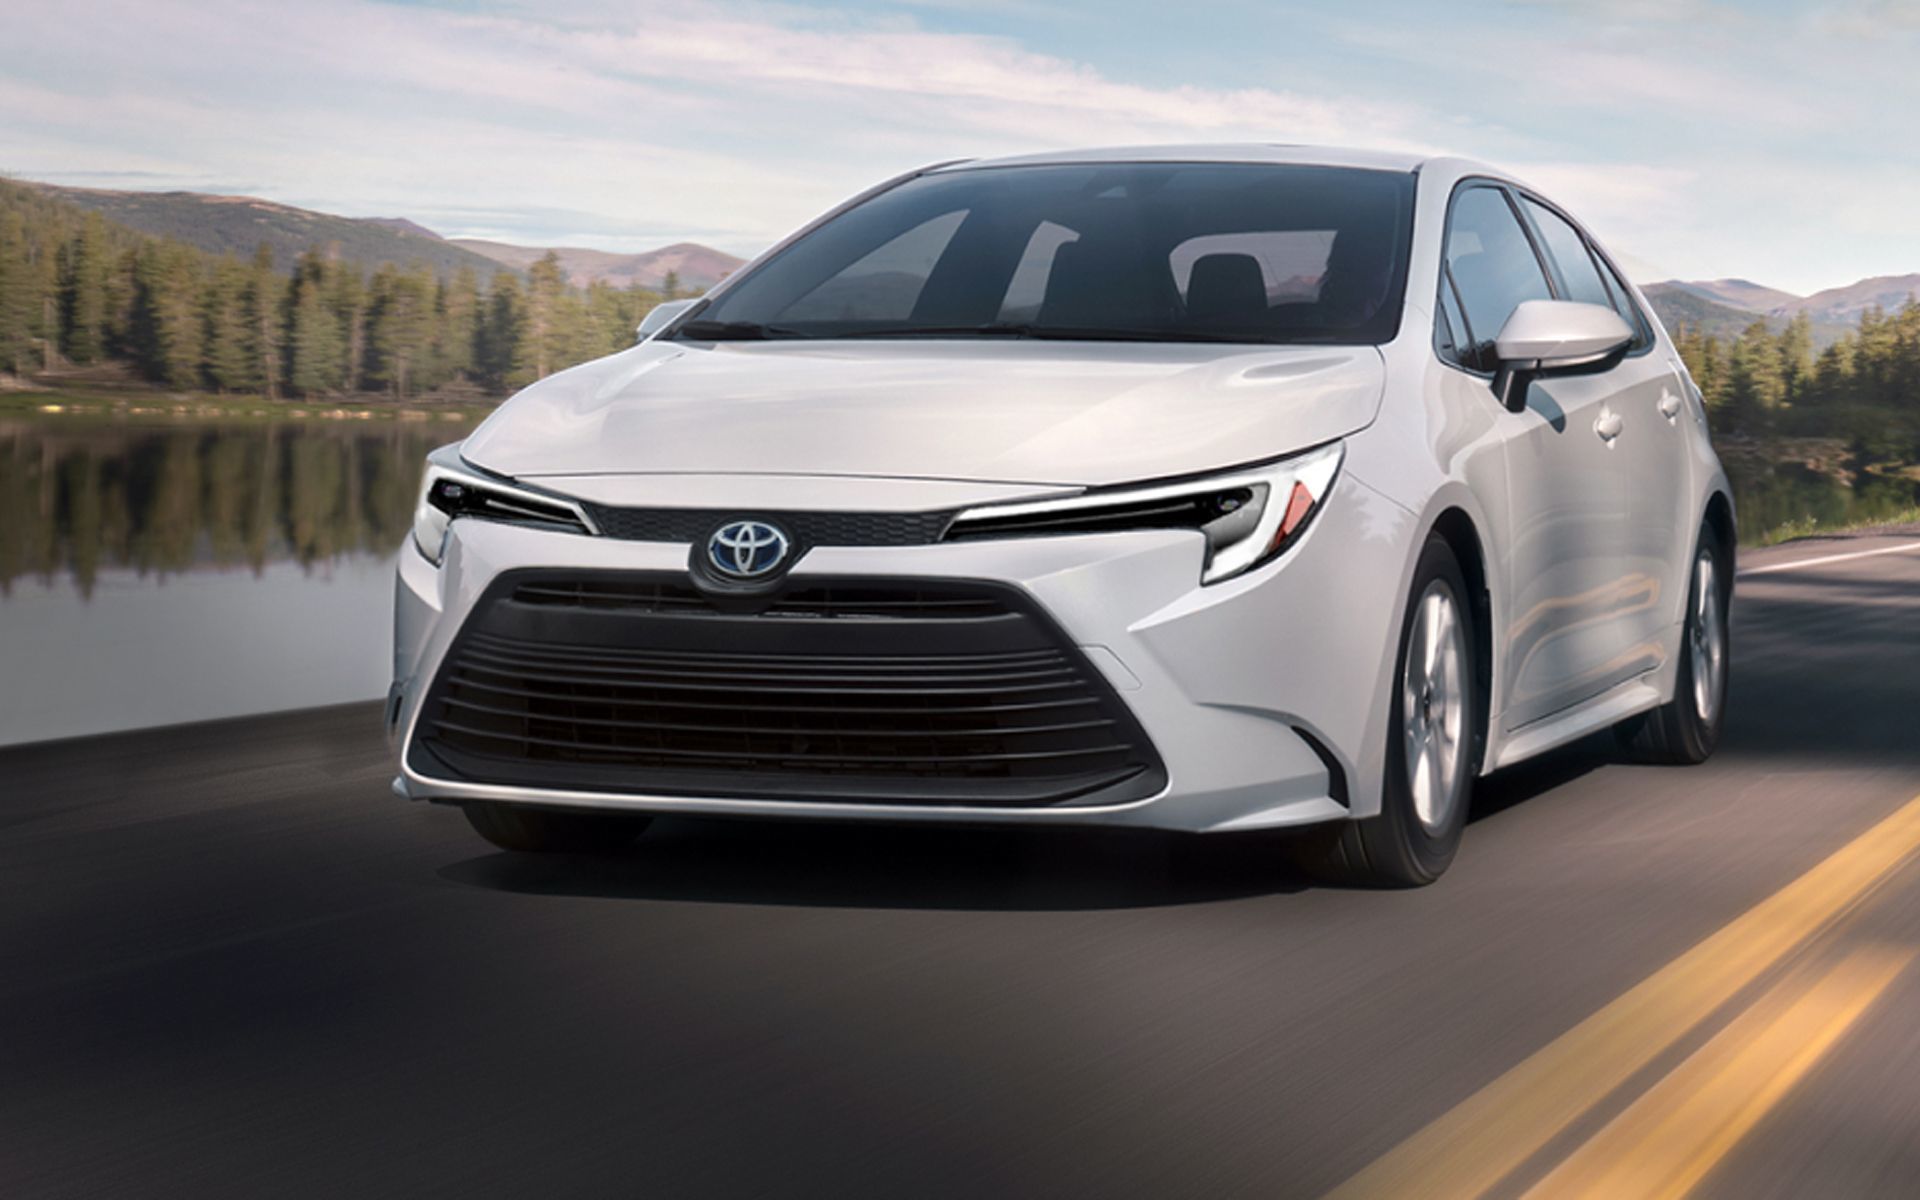 Toyota's approach to becoming carbon neutral